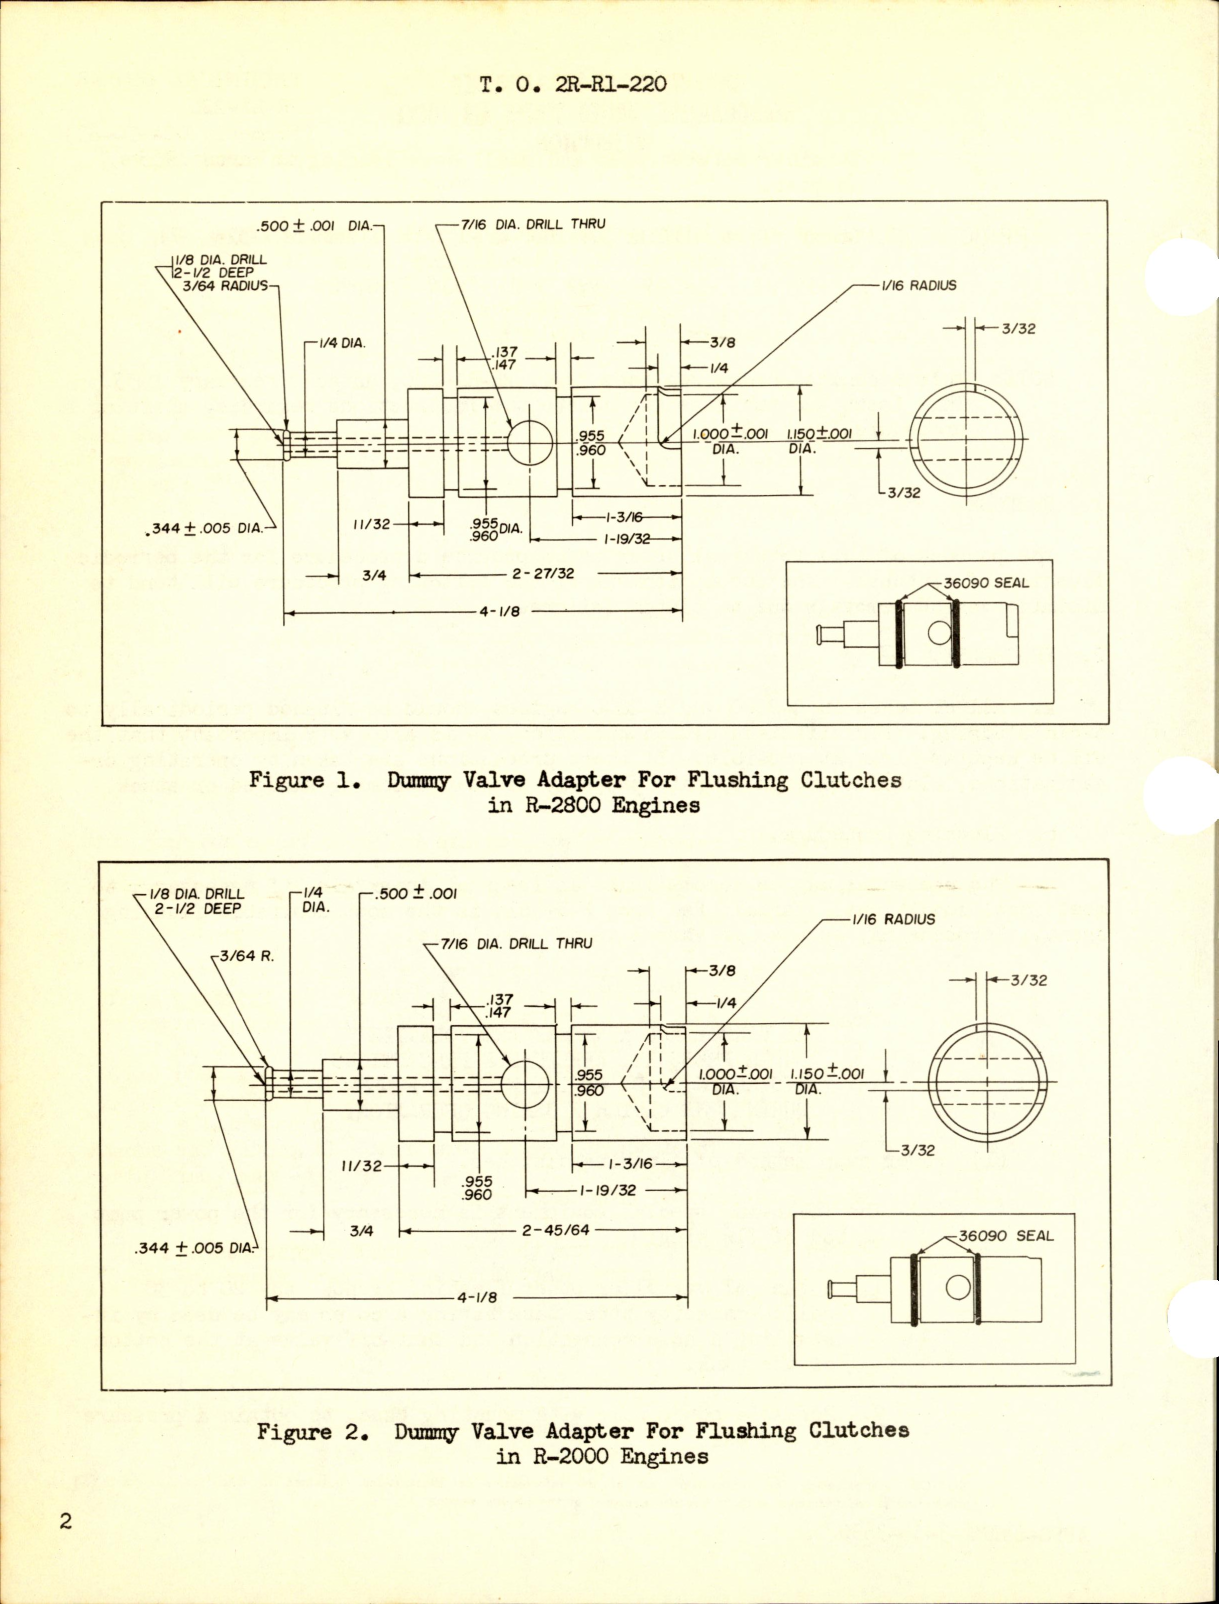 Sample page 2 from AirCorps Library document: Periodic Flushing of Clutches for R-2000 and R-2800 Engines